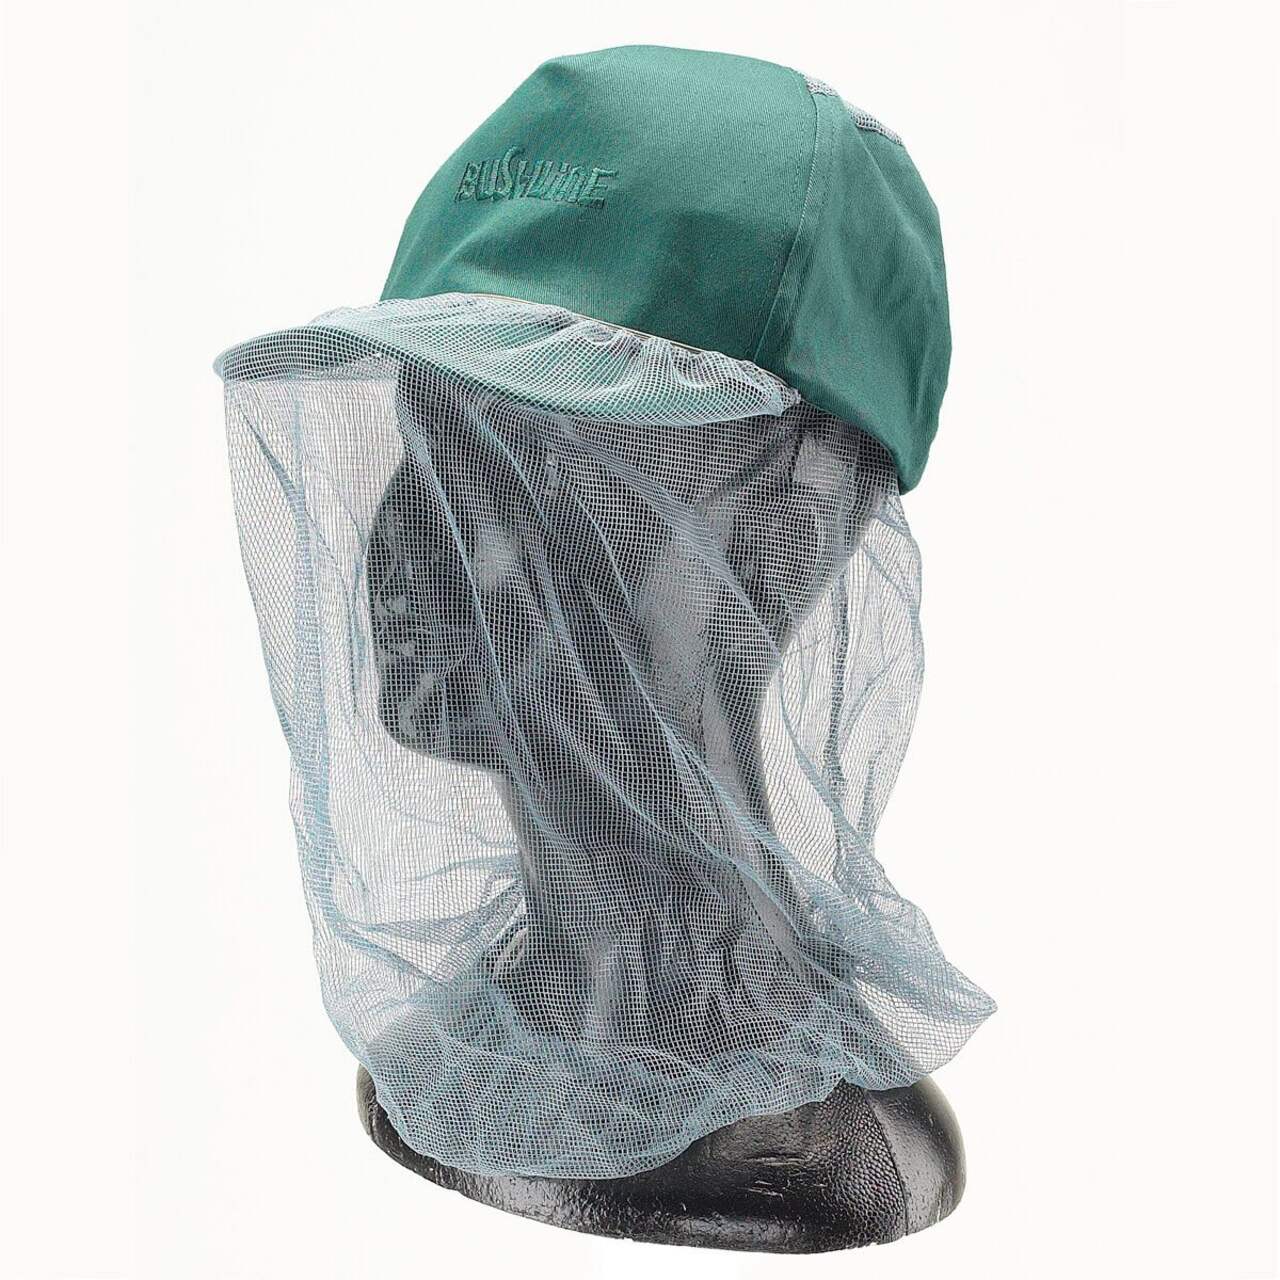 Adult Bug-Resistant Mesh Head Net for Camping/Fishing/Hiking/Gardening